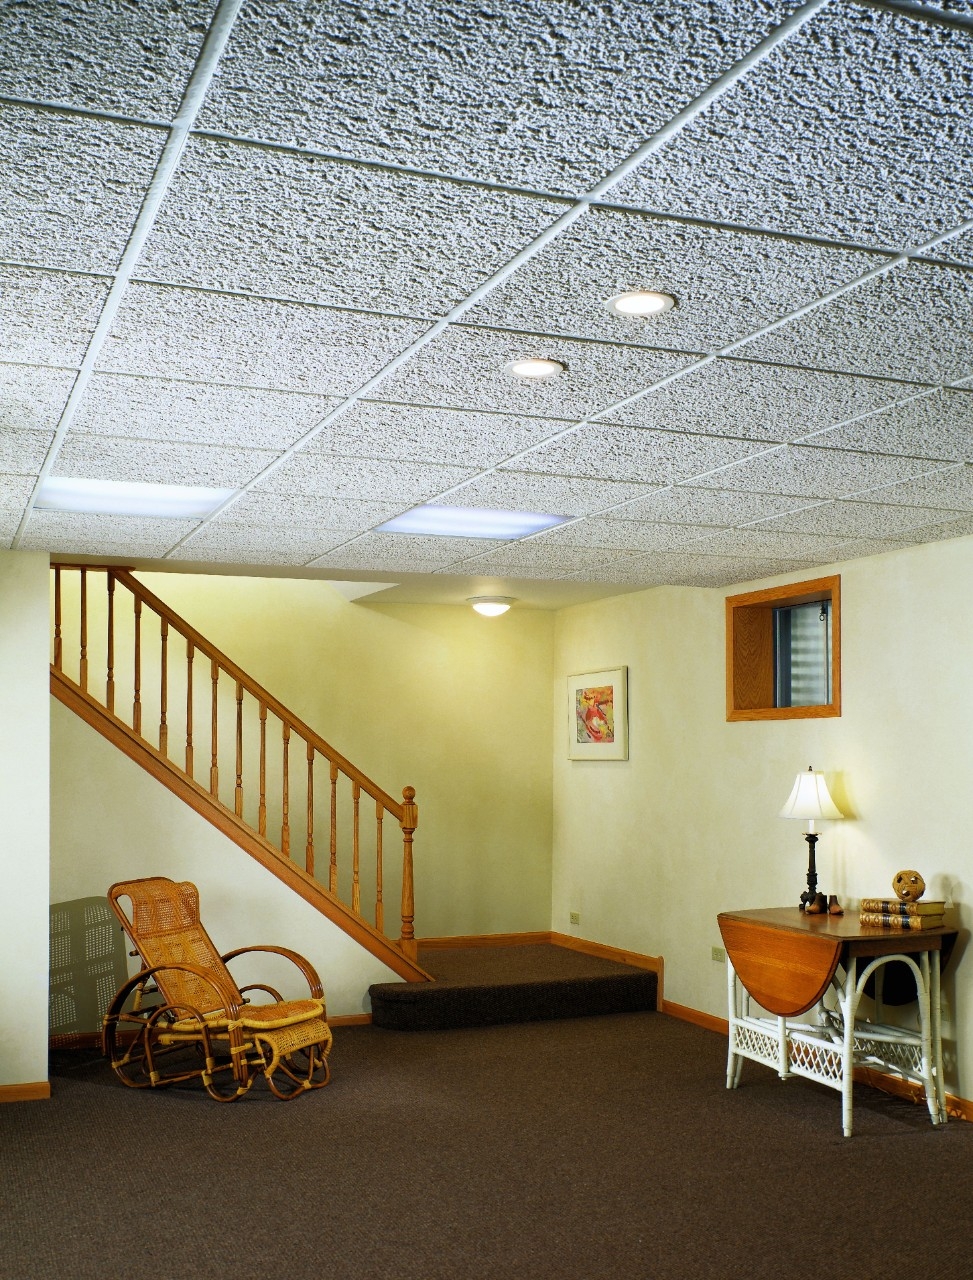 Stucco Over Ceiling Tiles